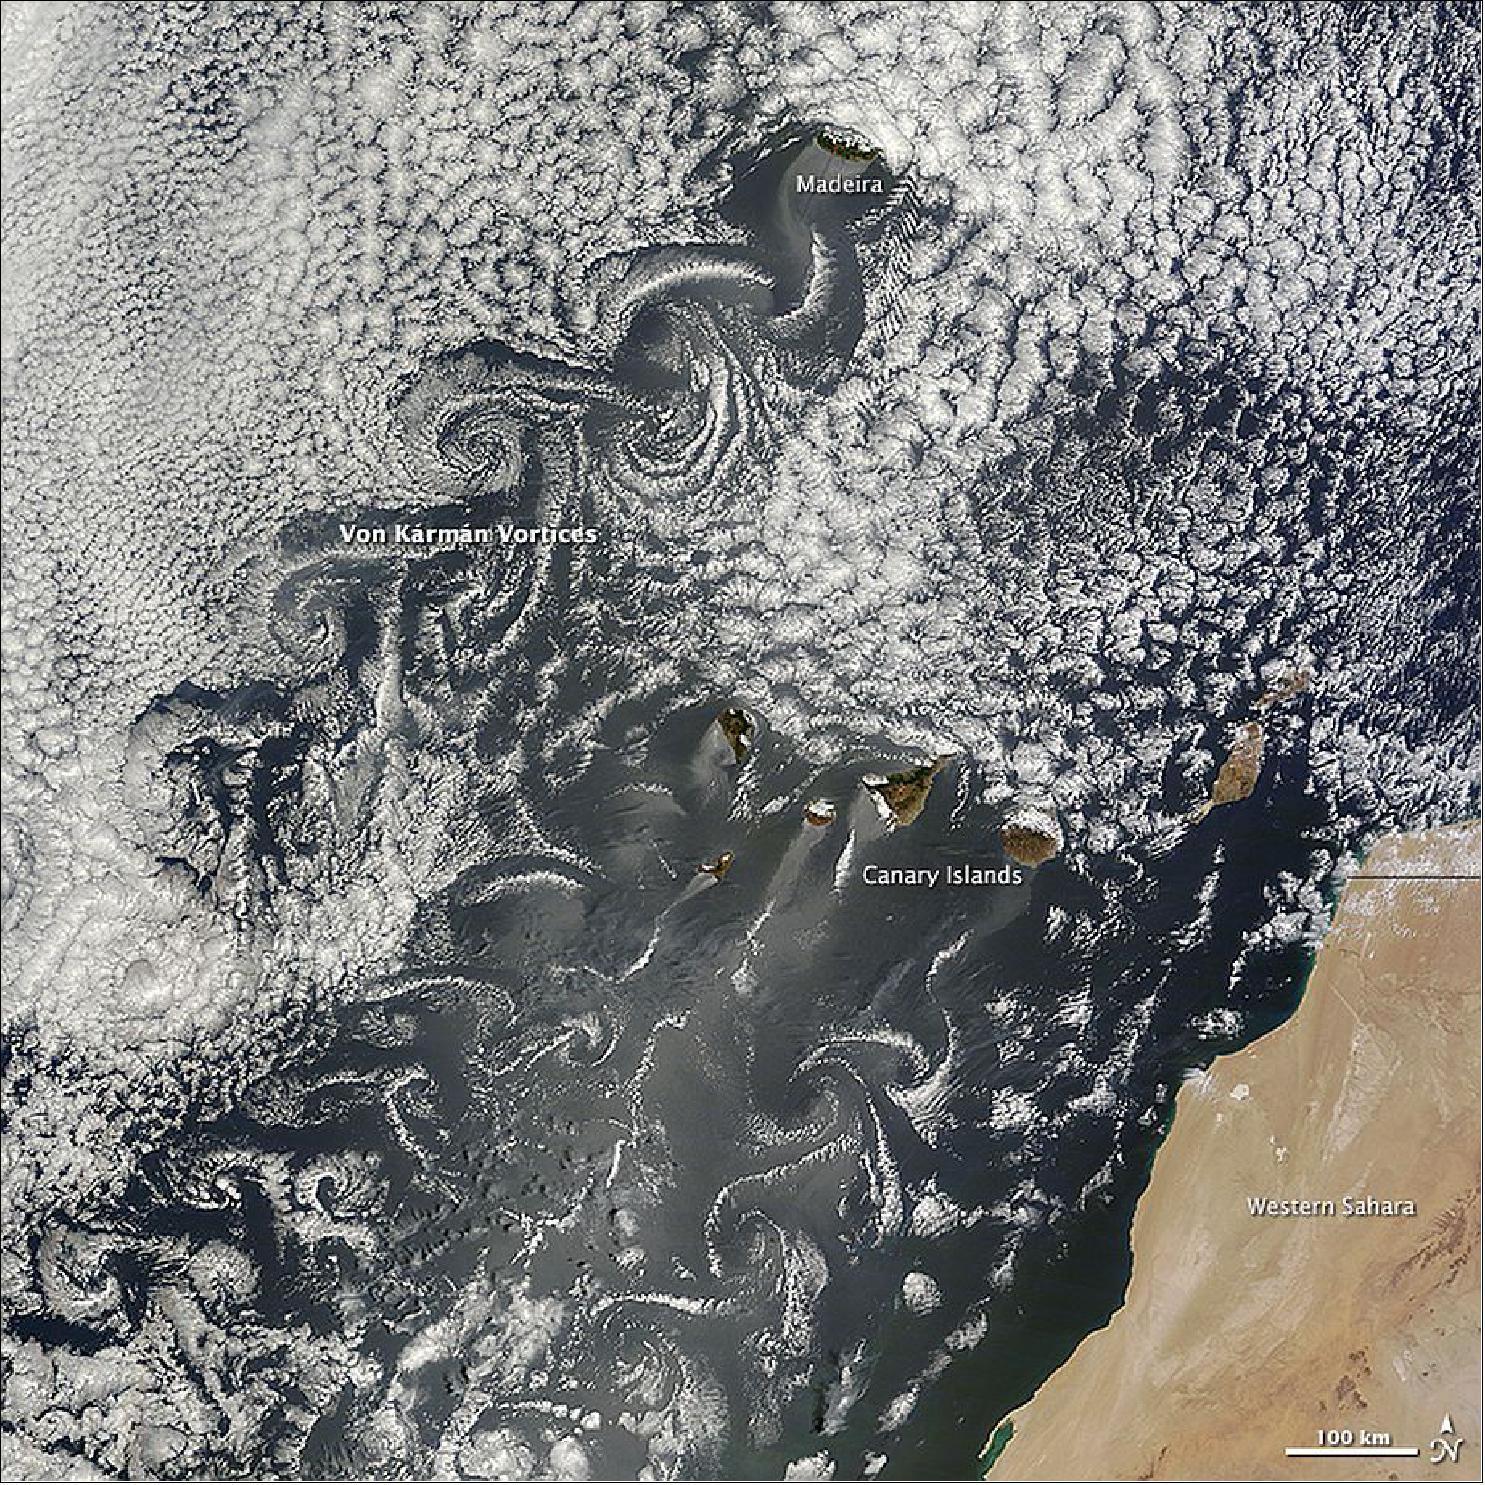 Figure 99: Von Kármán vortices over the northwest coast of Africa, acquired on May 20, 2015 with MODIS on Terra (image credit: NASA Earth Observatory, Jeff Schmaltz)